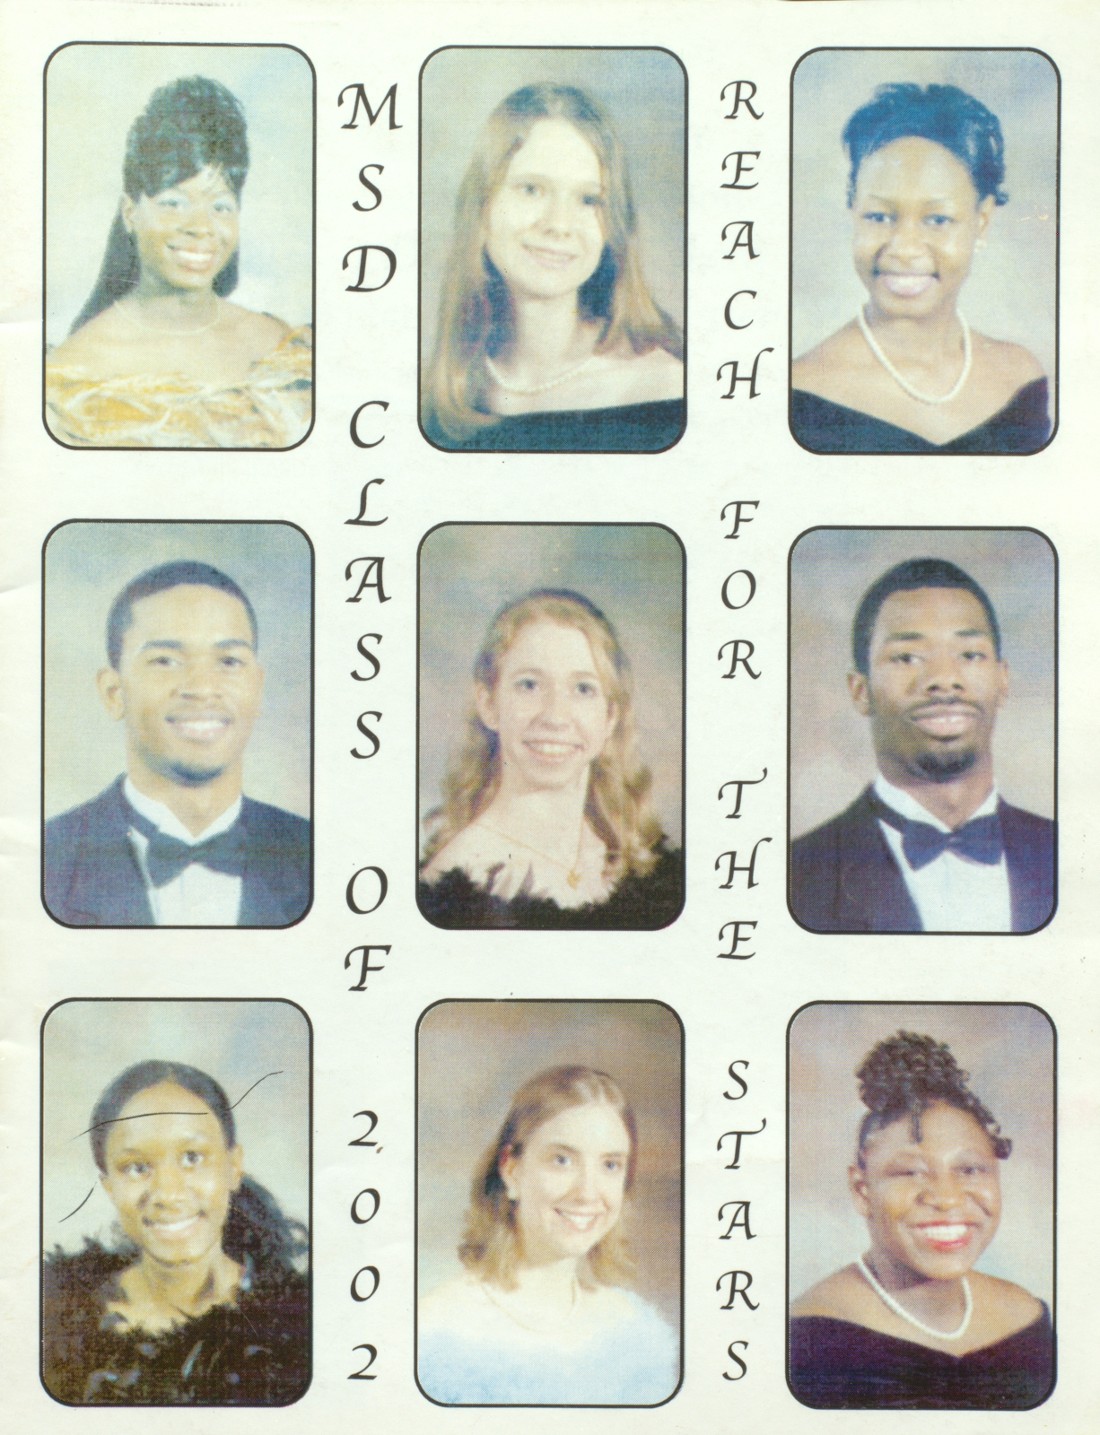 2002 yearbook from Mississippi School for the Deaf from Jackson ...